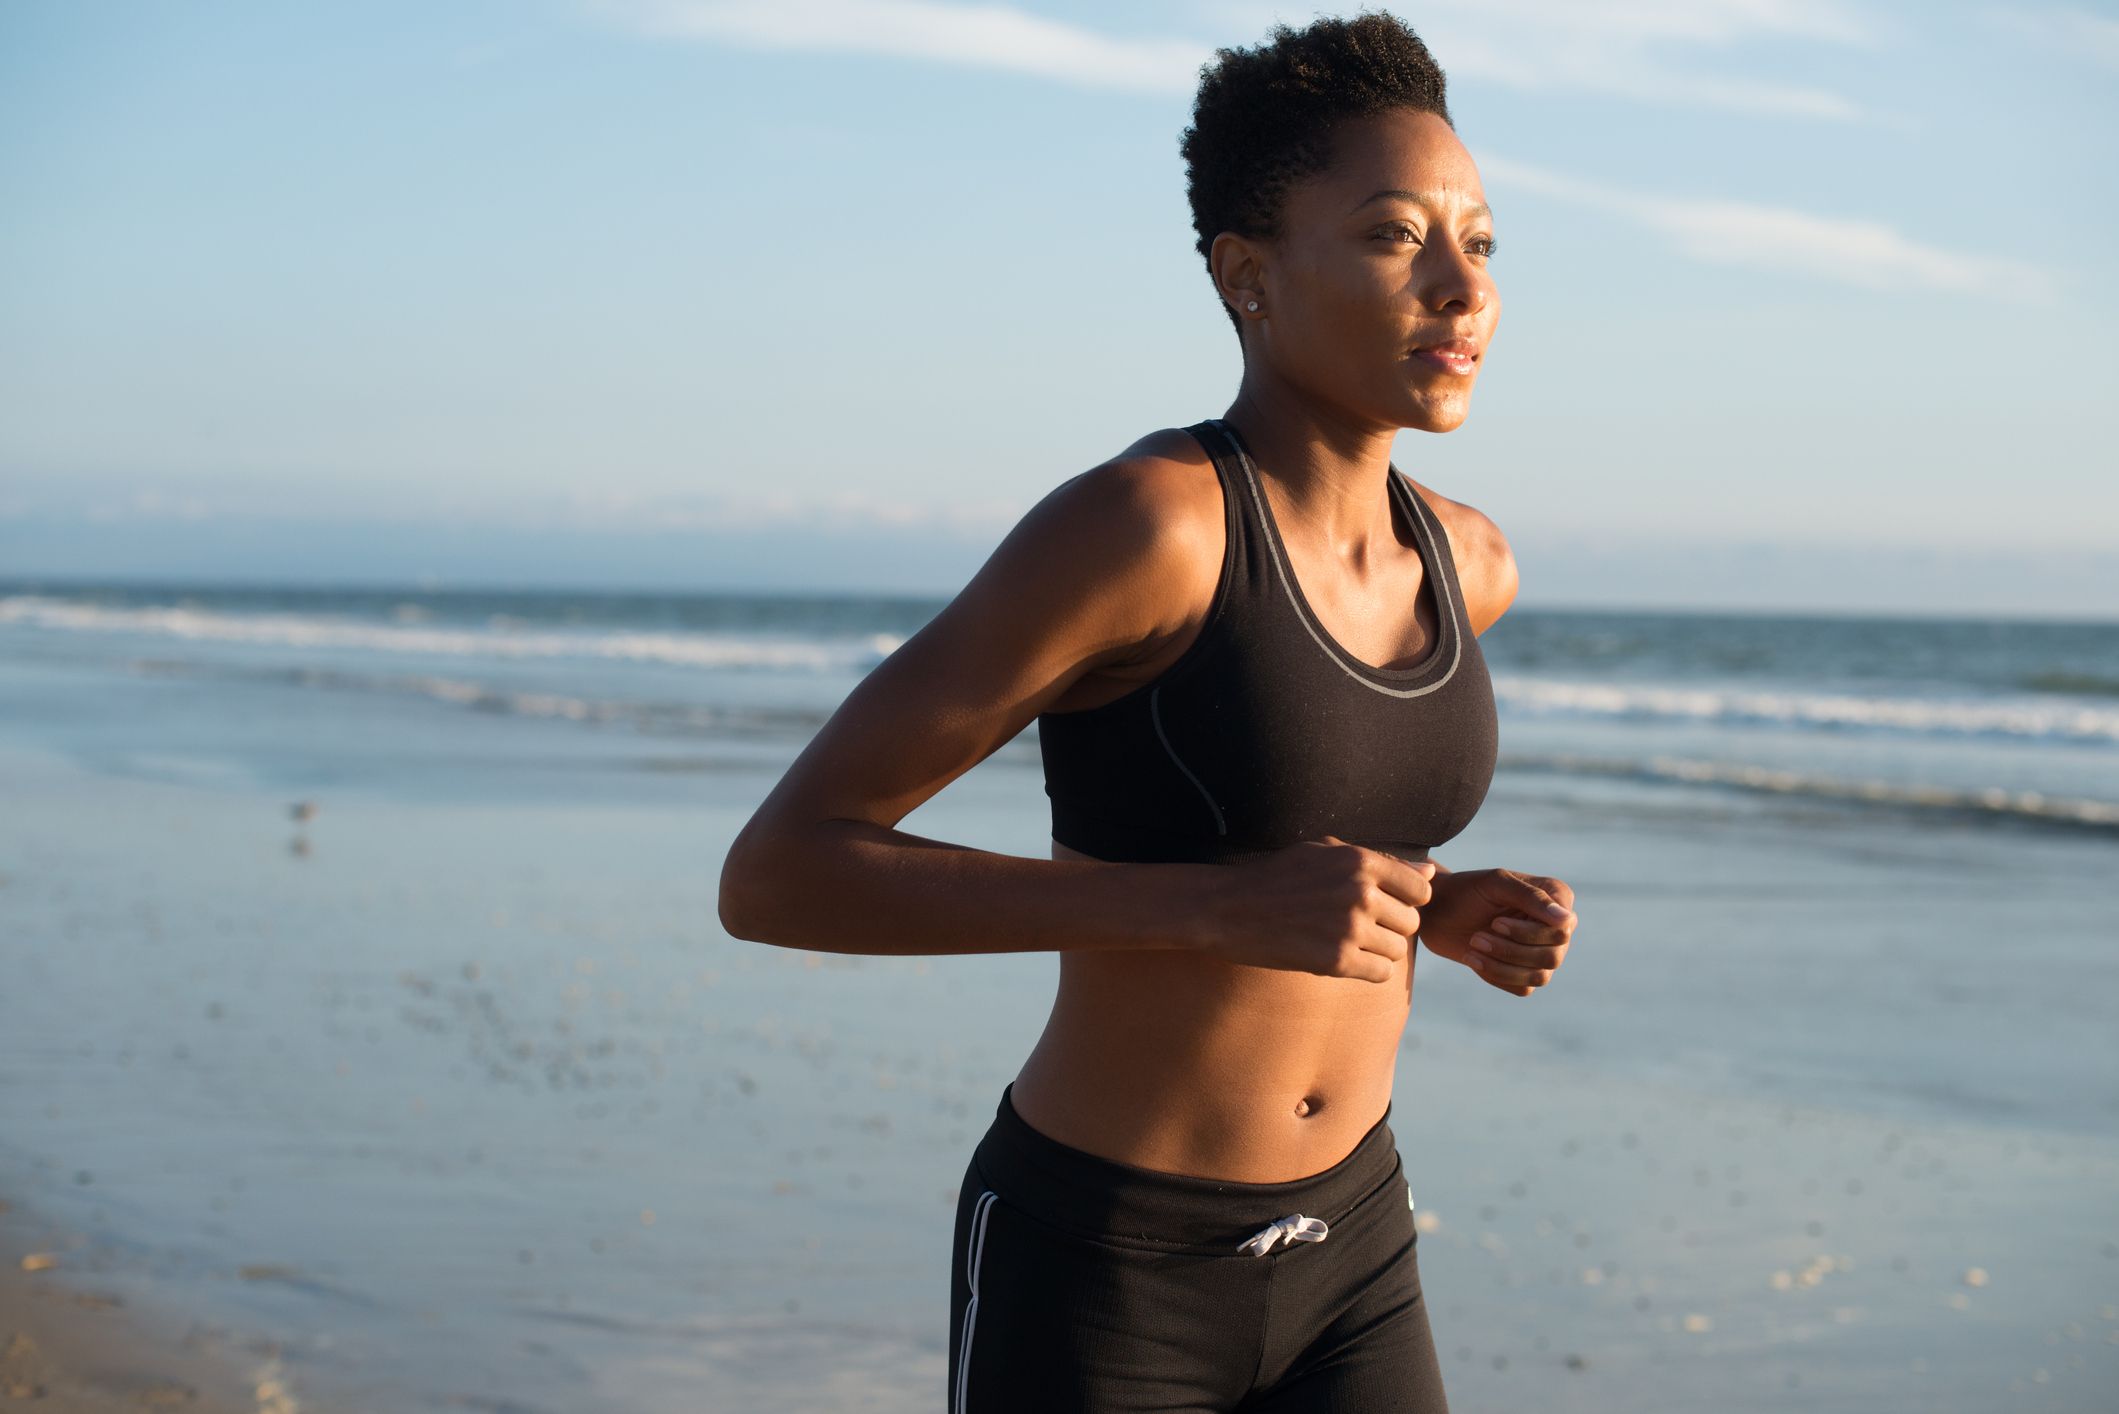 Sore Boobs While Running? Here's Why You Might Be Experiencing